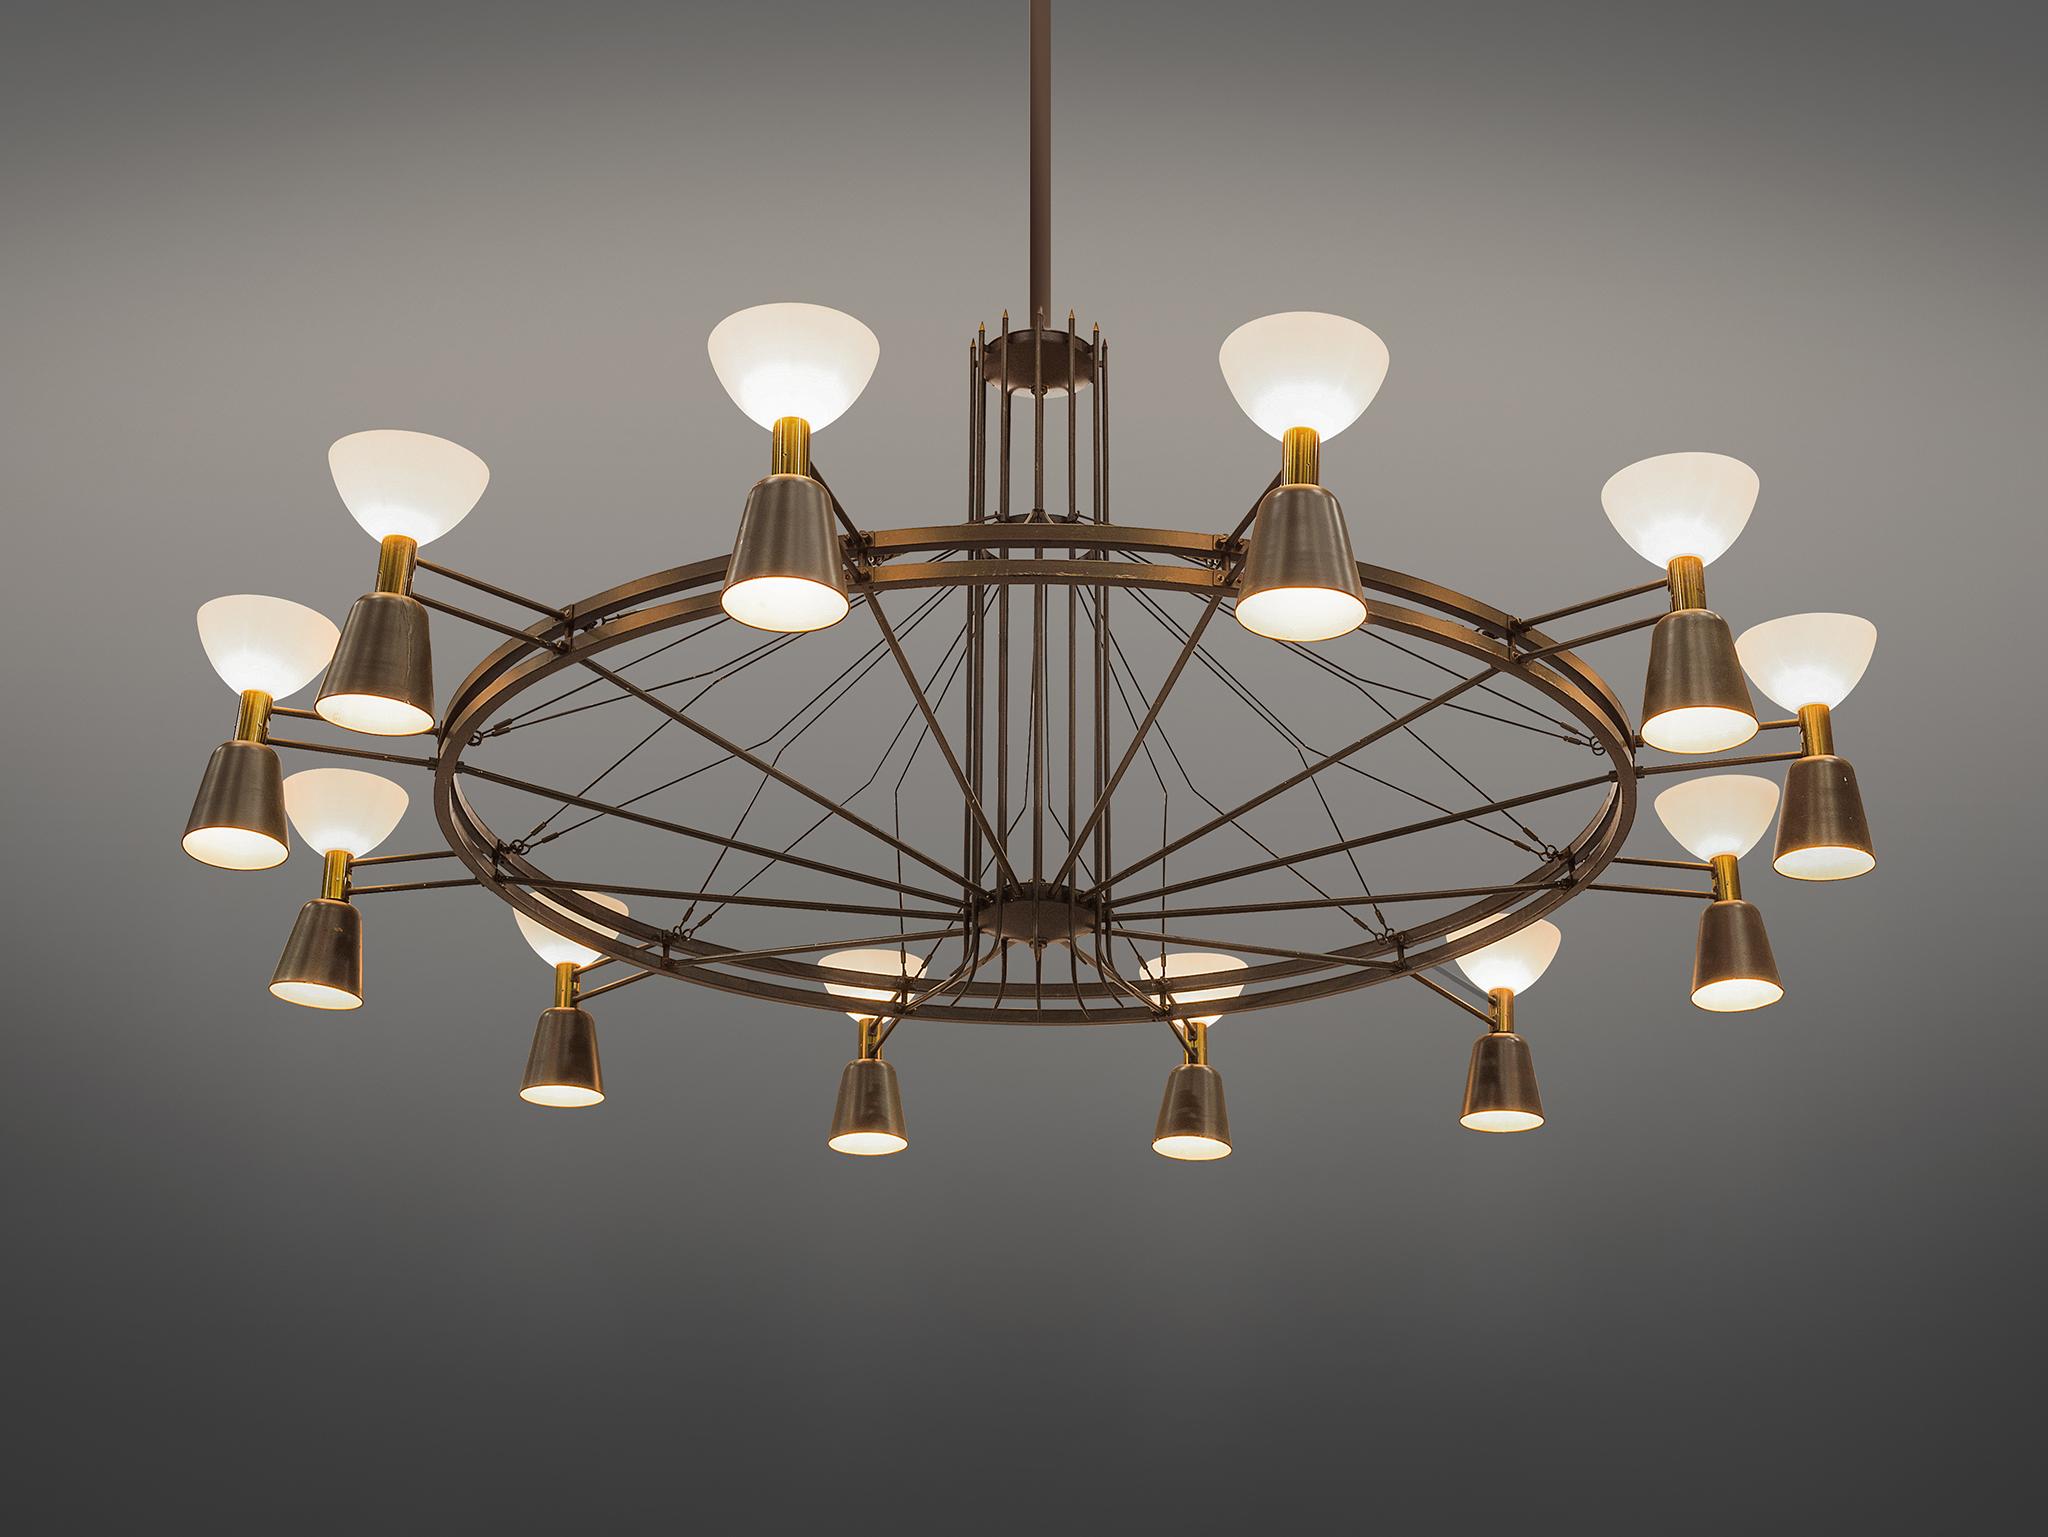 Chandelier, metal, glass, The Netherlands, circa 1950.

This large Dutch chandelier is made in the 1950s by a local designer in the Eastern region of the Netherlands. The chandelier features twelve shades that shine both upwards and downwards. The